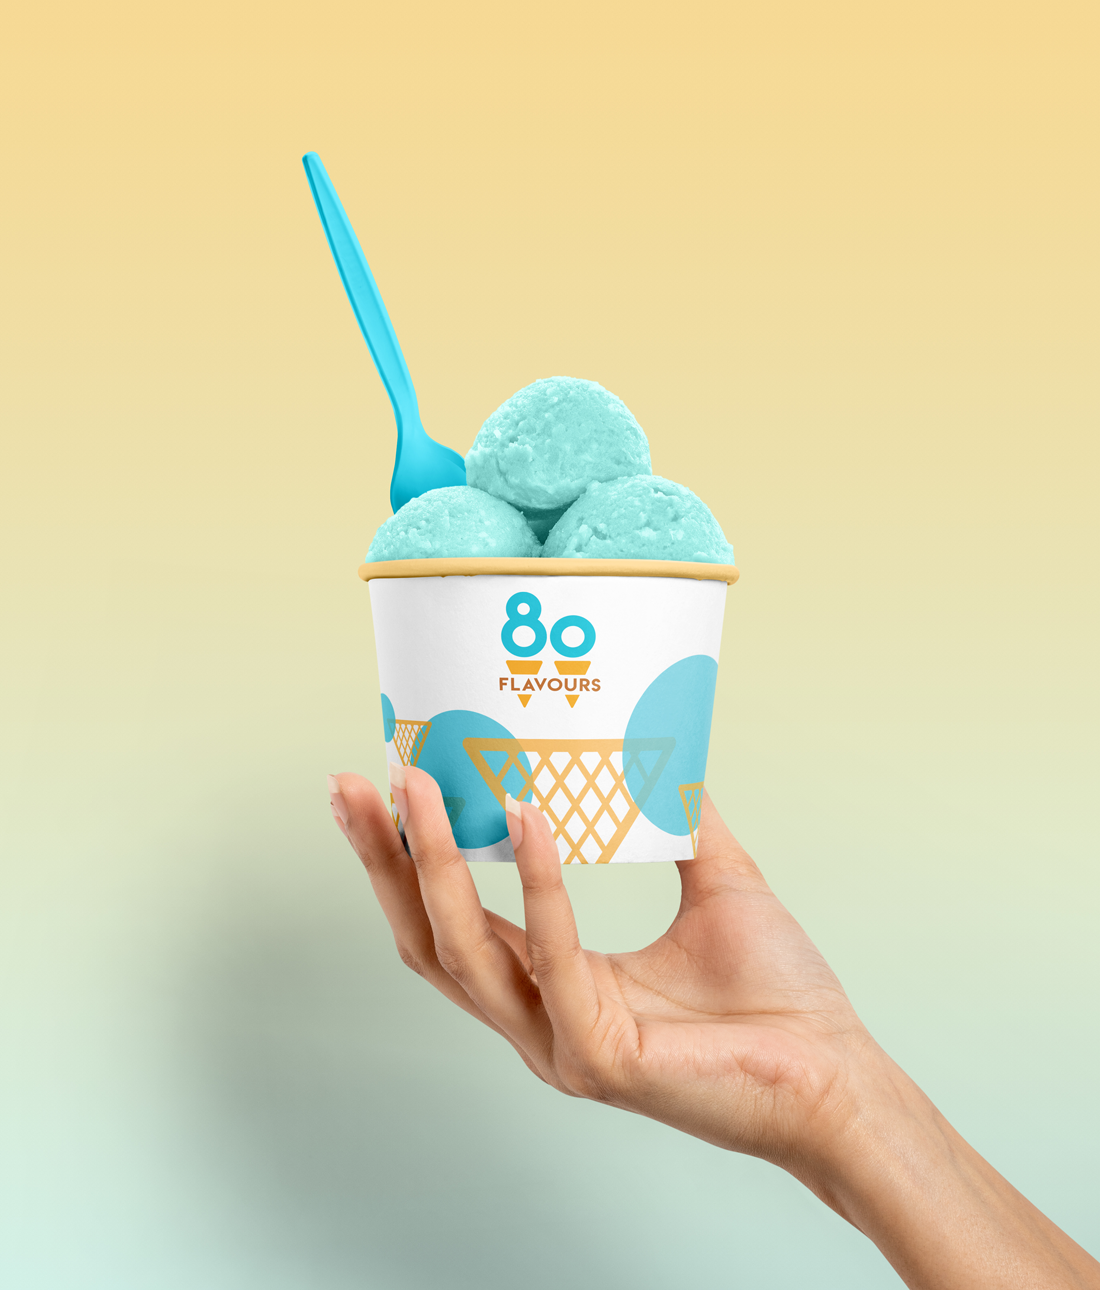 80 Flavours Brand Redesign - Image 2